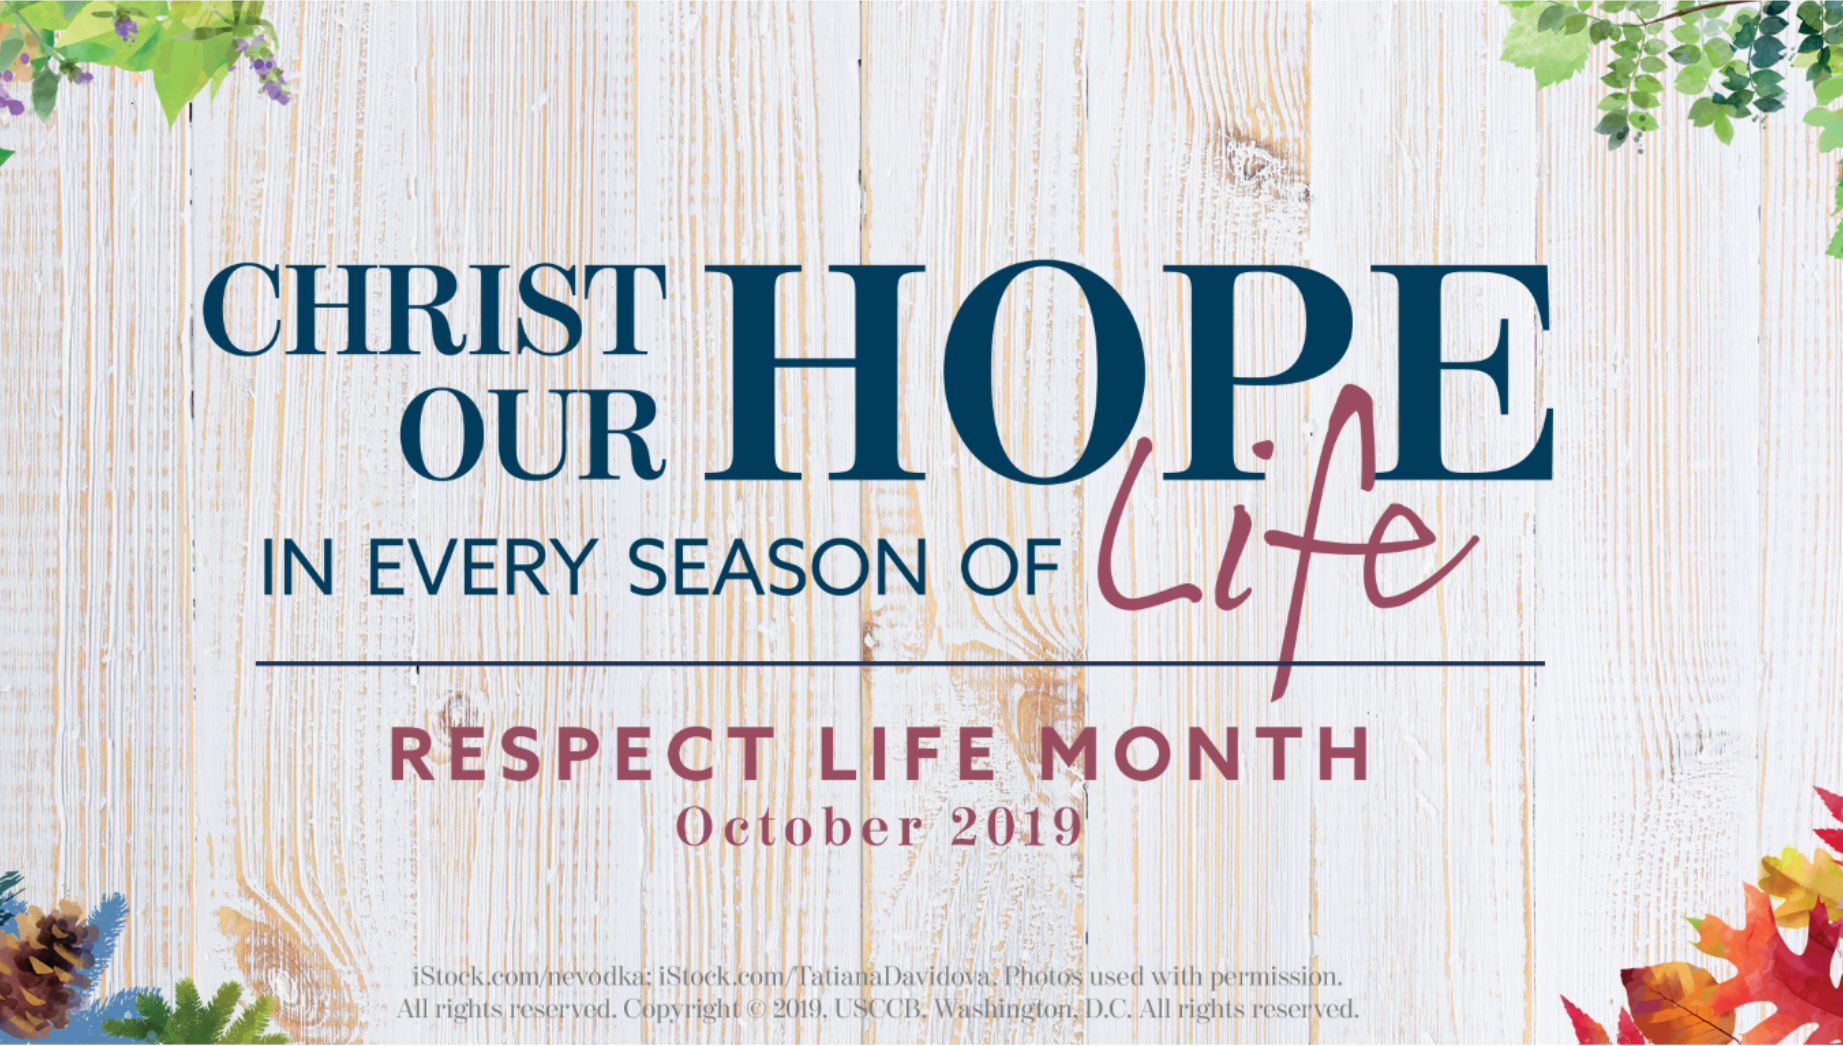 Web_Ad_-_repect_life_month_2019.png